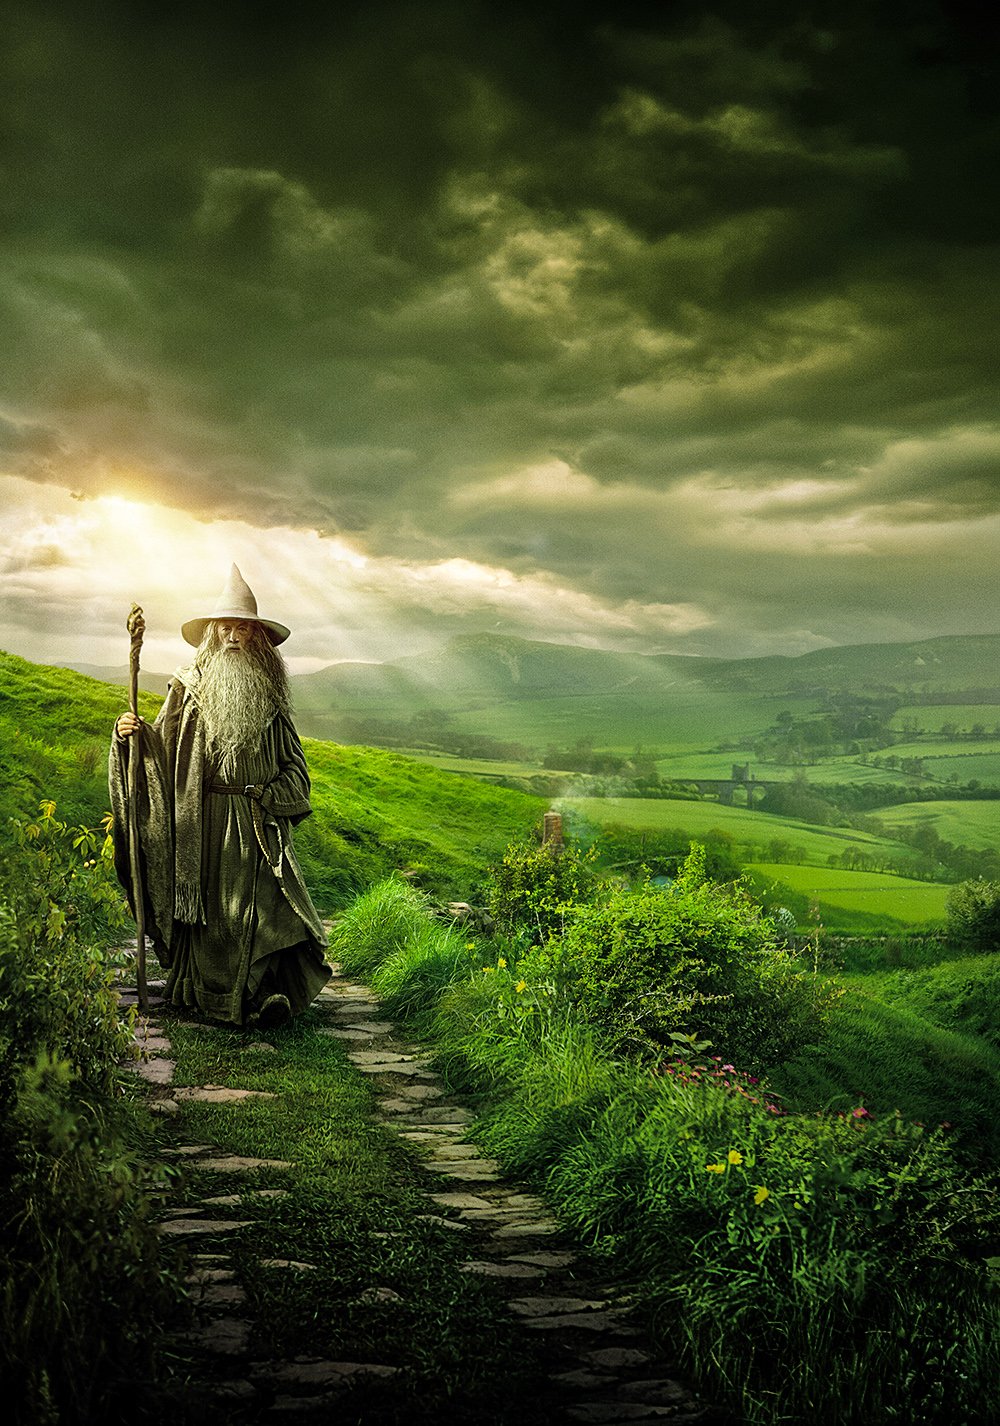 The Hobbit: An Unexpected Journey download the new version for apple